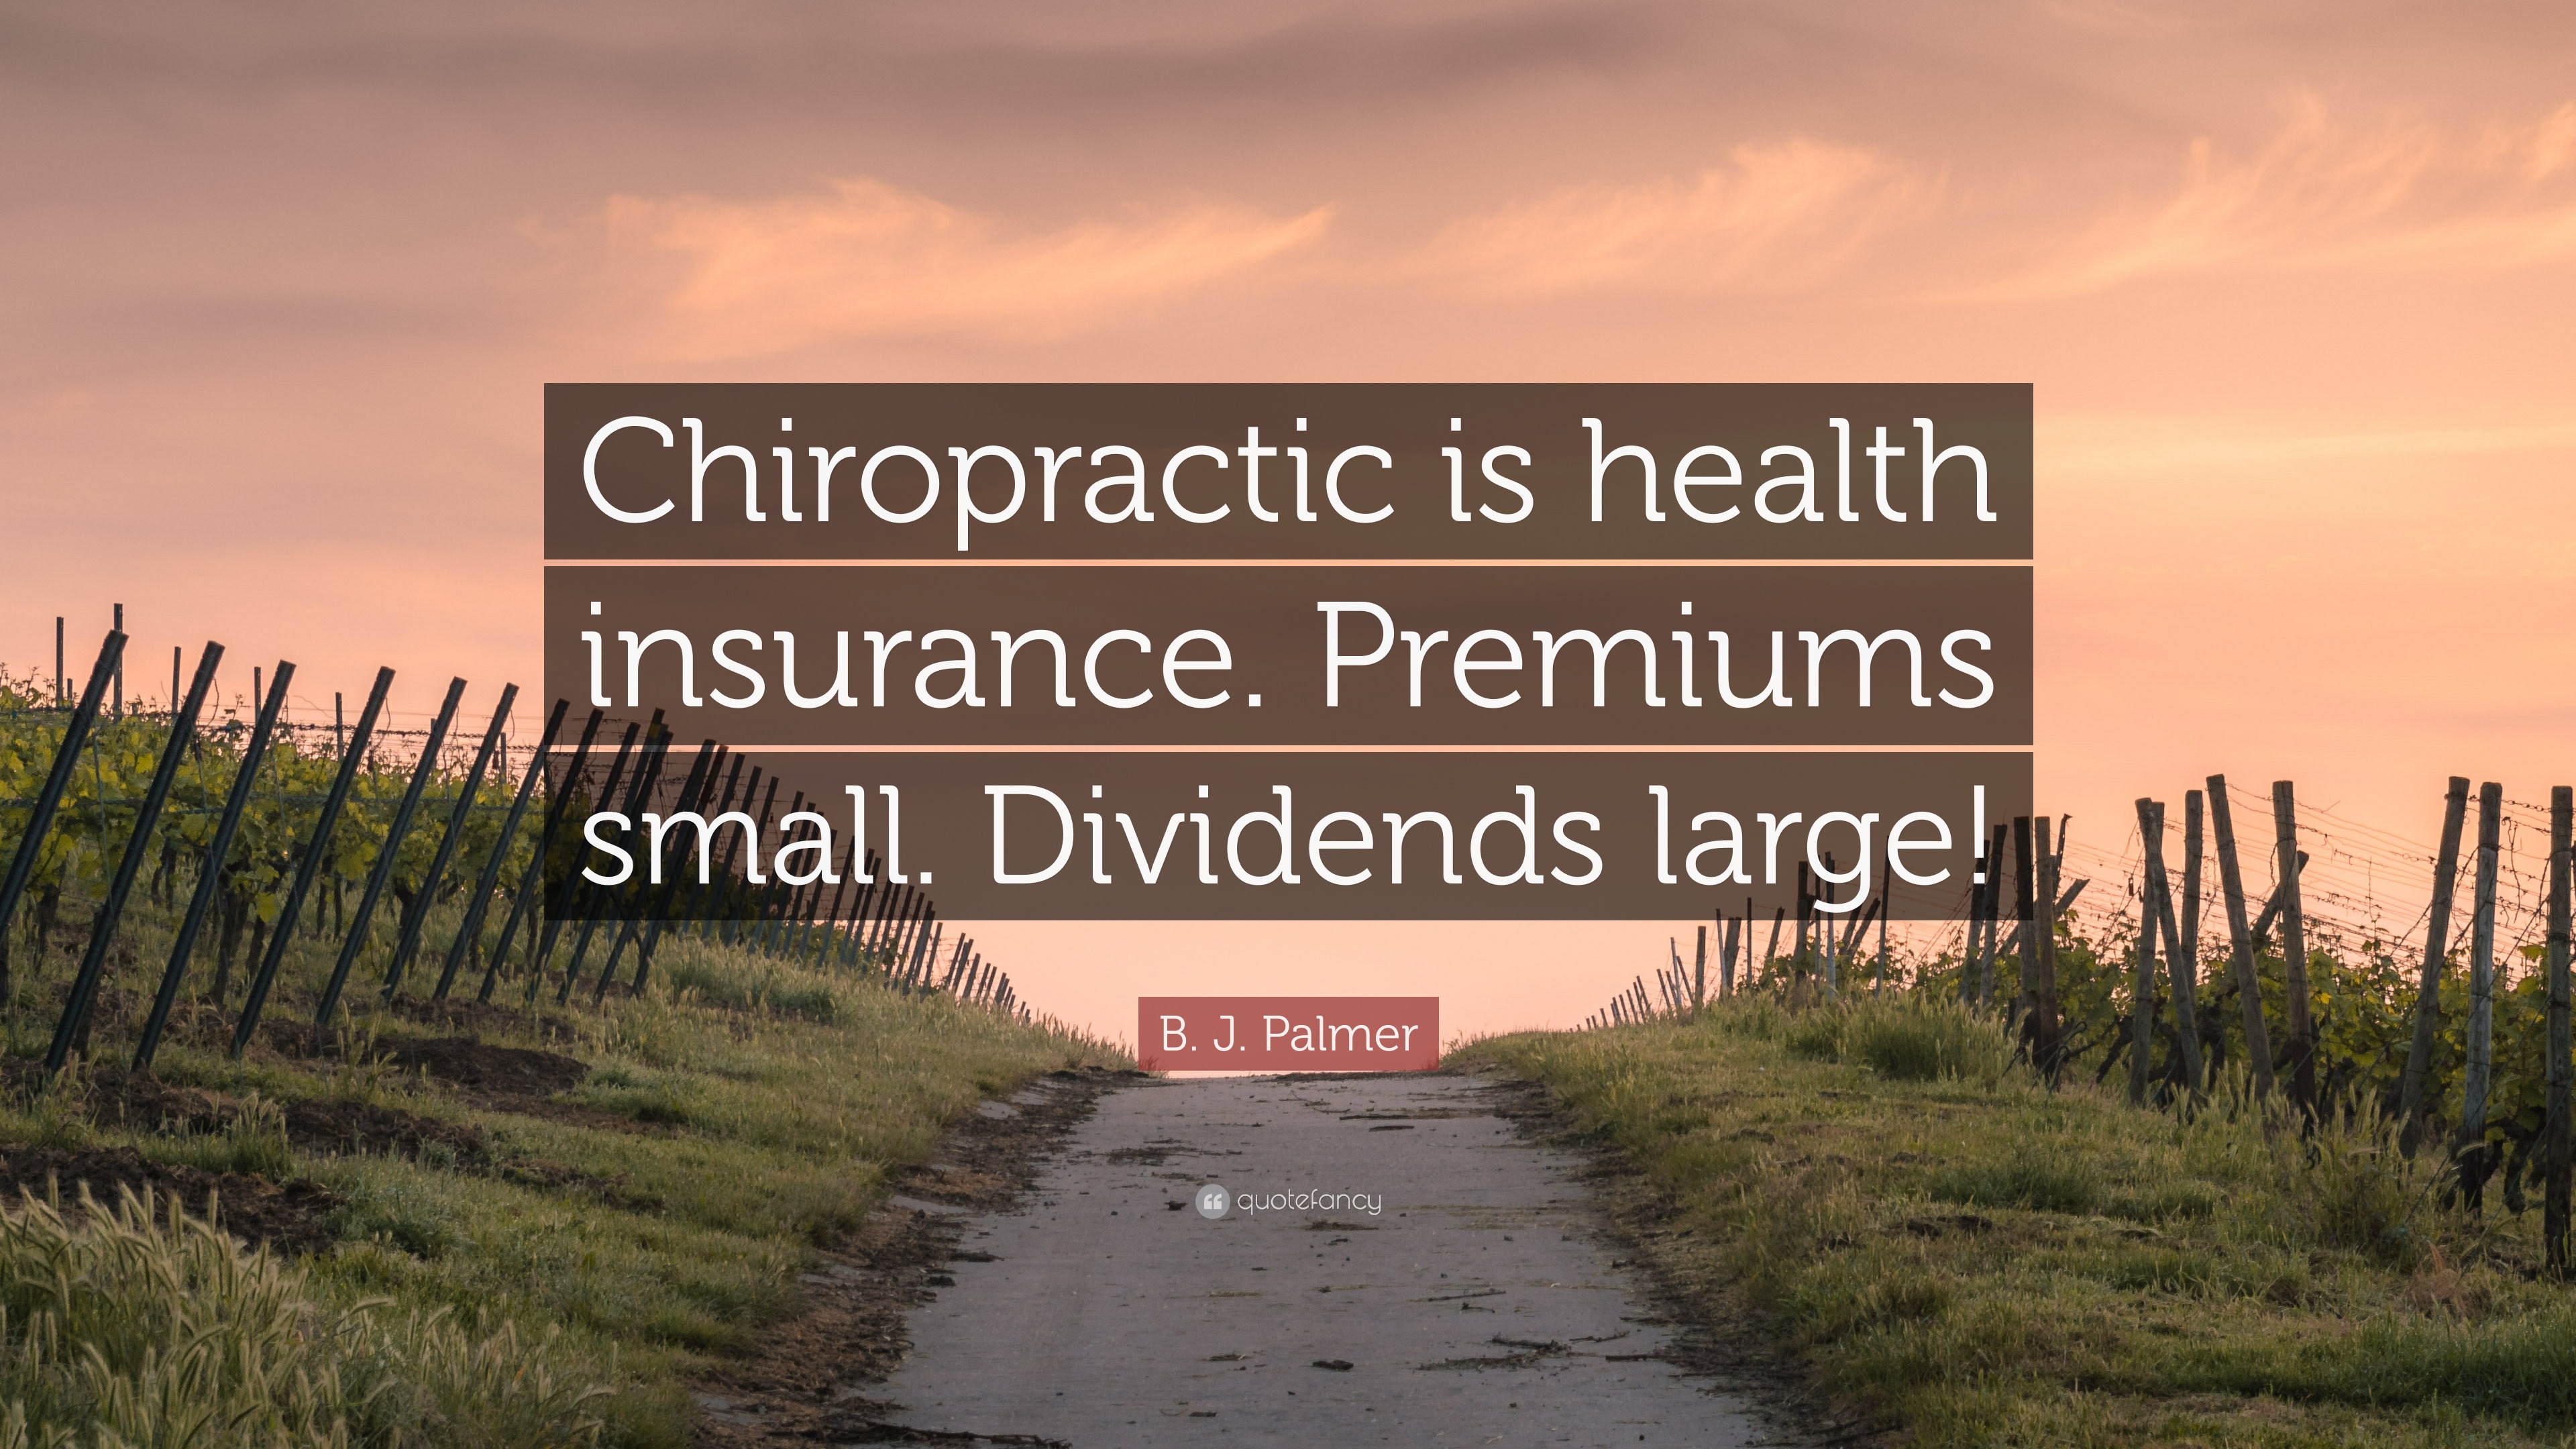 B J Palmer Quote  Chiropractic is health  insurance  